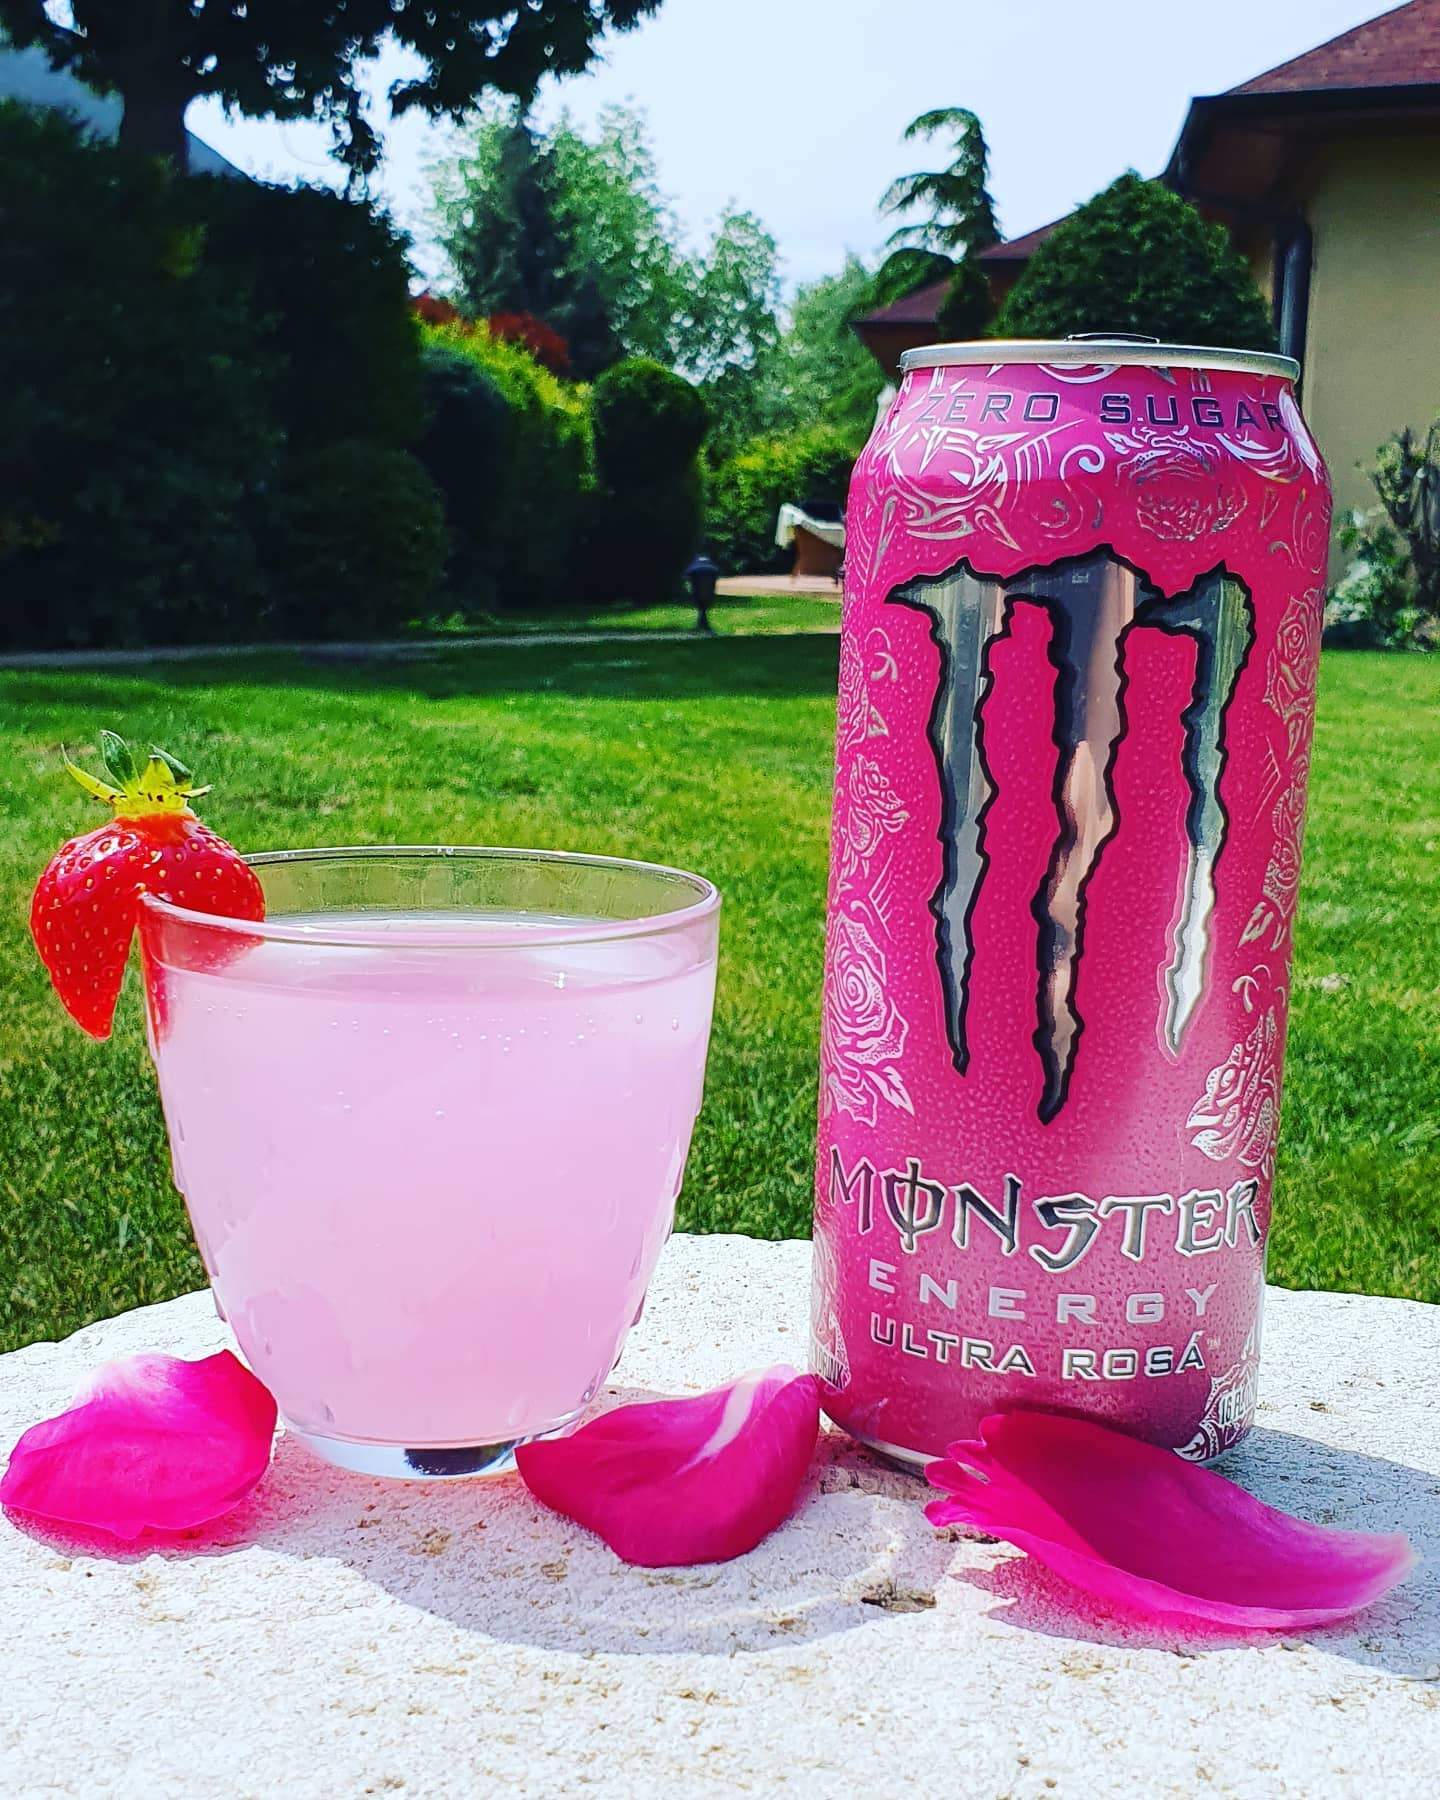 Monster Energy Ultra Rosa Silver Tap Canadian Edition-Monster-energy,energy drink,monster,monster energy